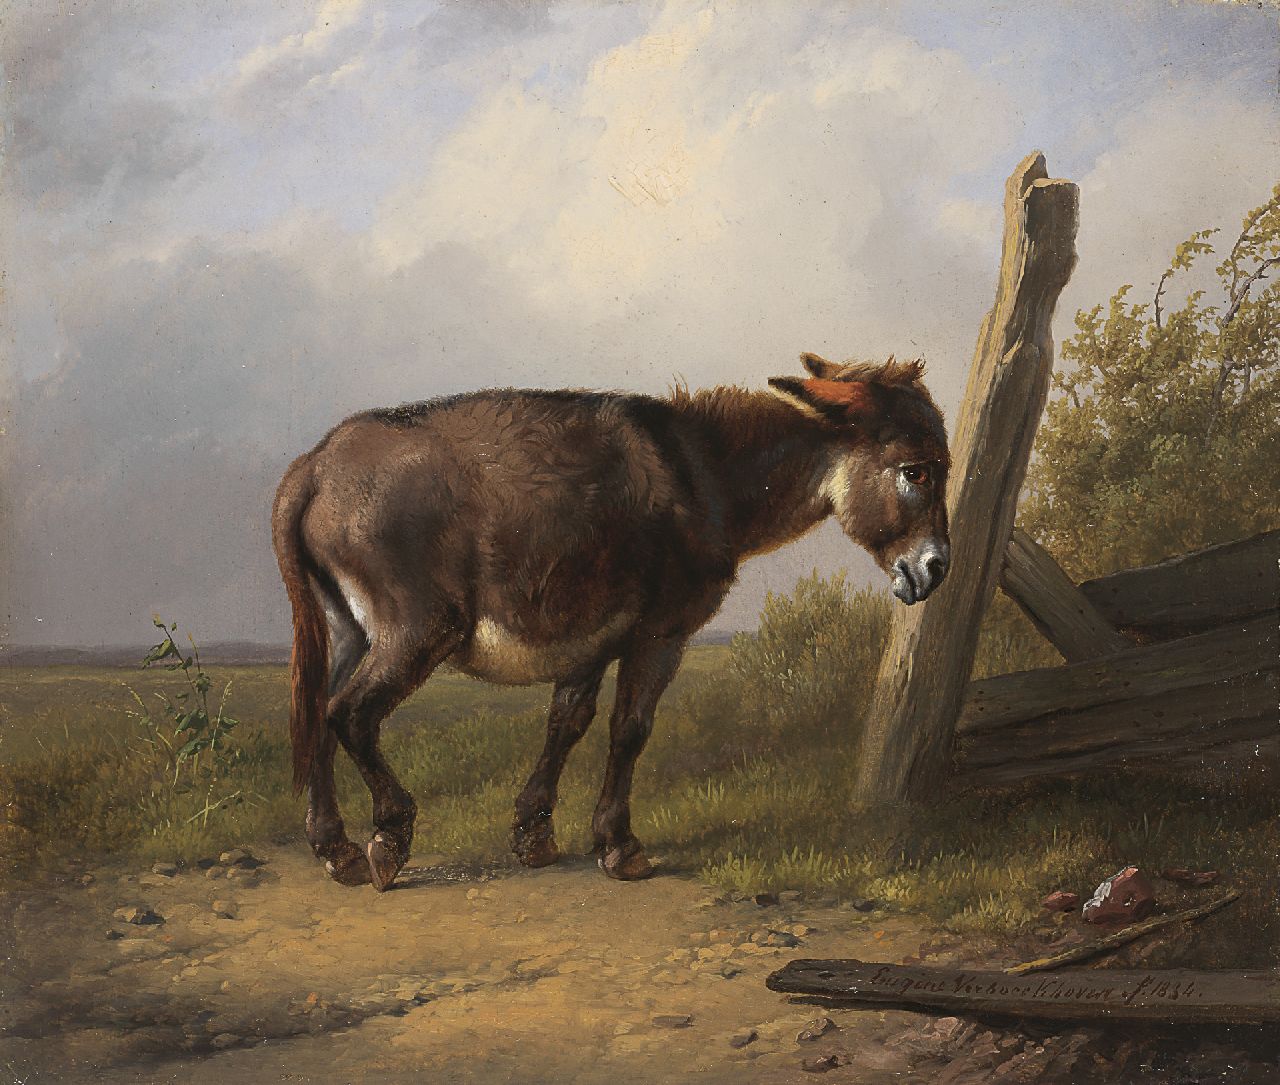 Verboeckhoven E.J.  | Eugène Joseph Verboeckhoven, A donkey at rest by a fence, oil on panel 14.1 x 16.6 cm, signed l.r. and painted 1838